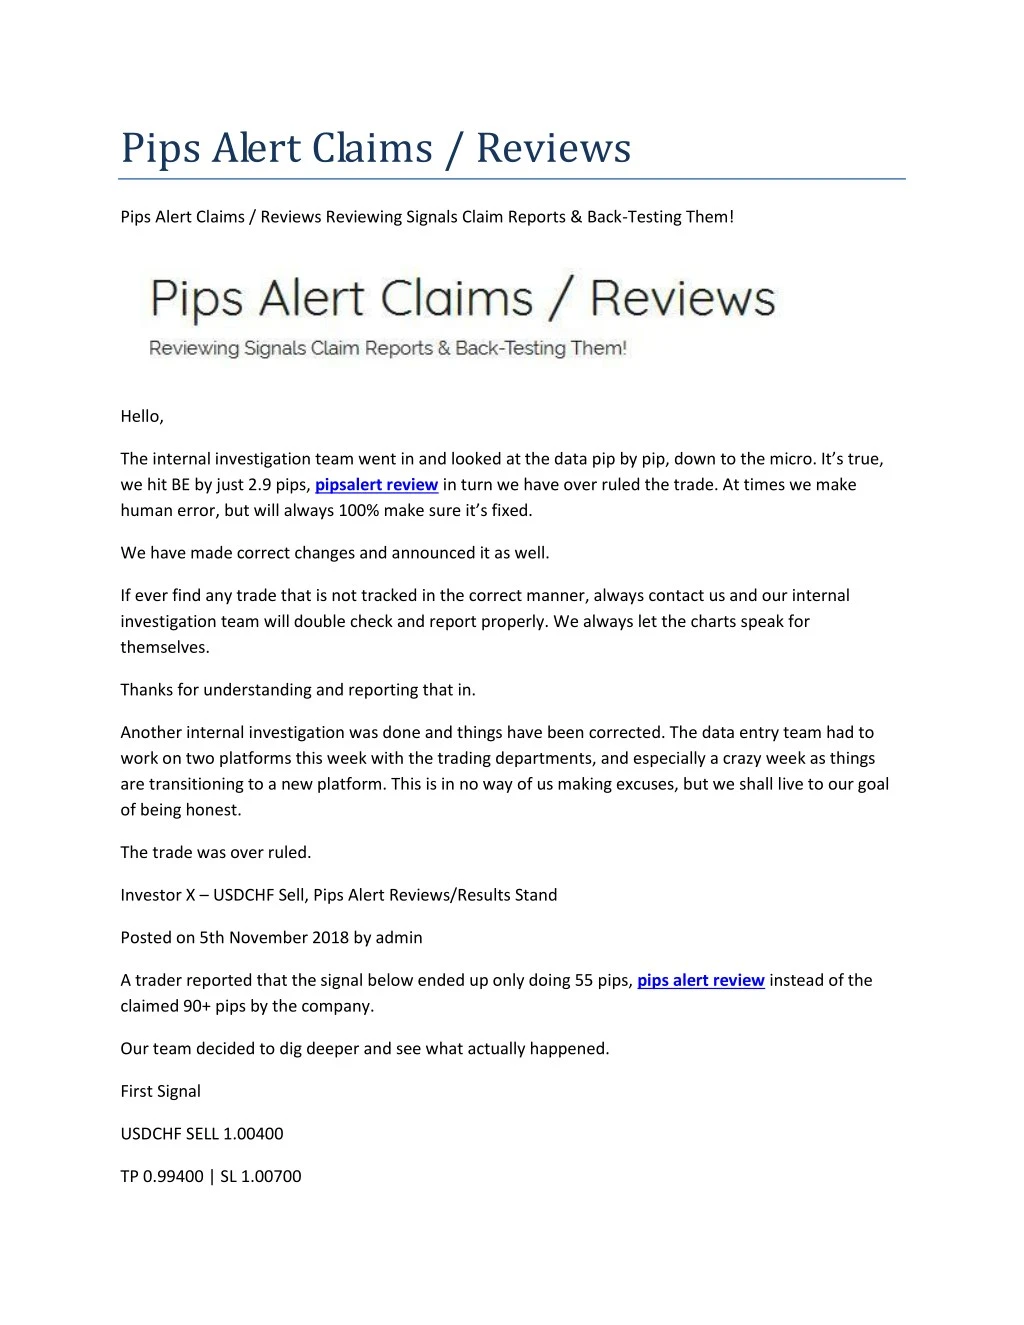 pips alert claims reviews